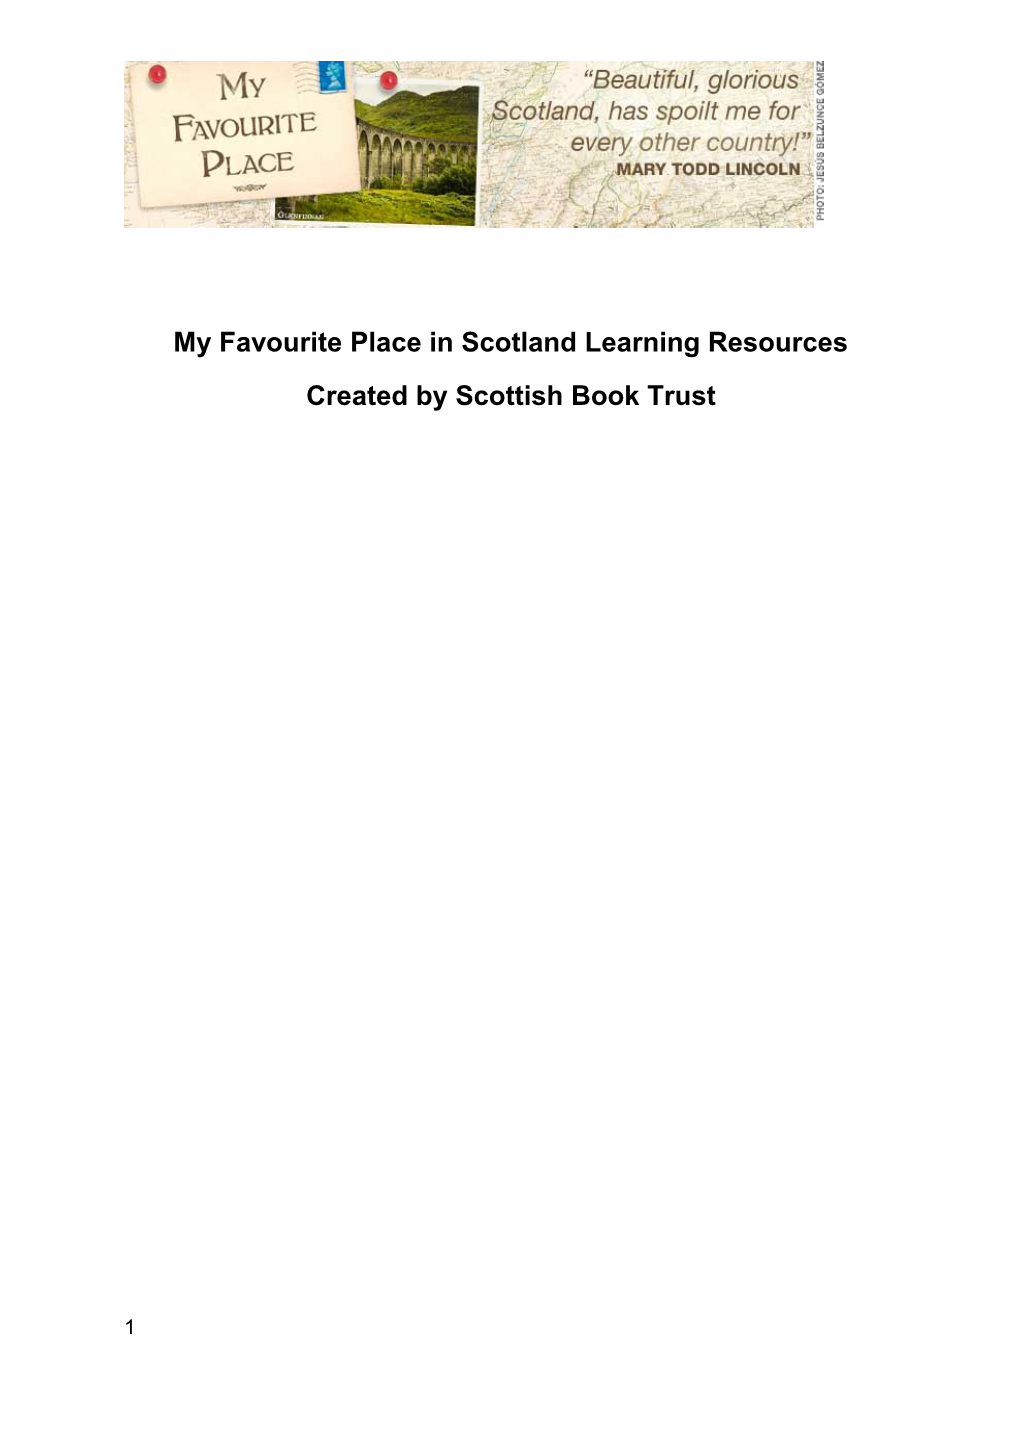 My Favourite Place in Scotland Learning Resources